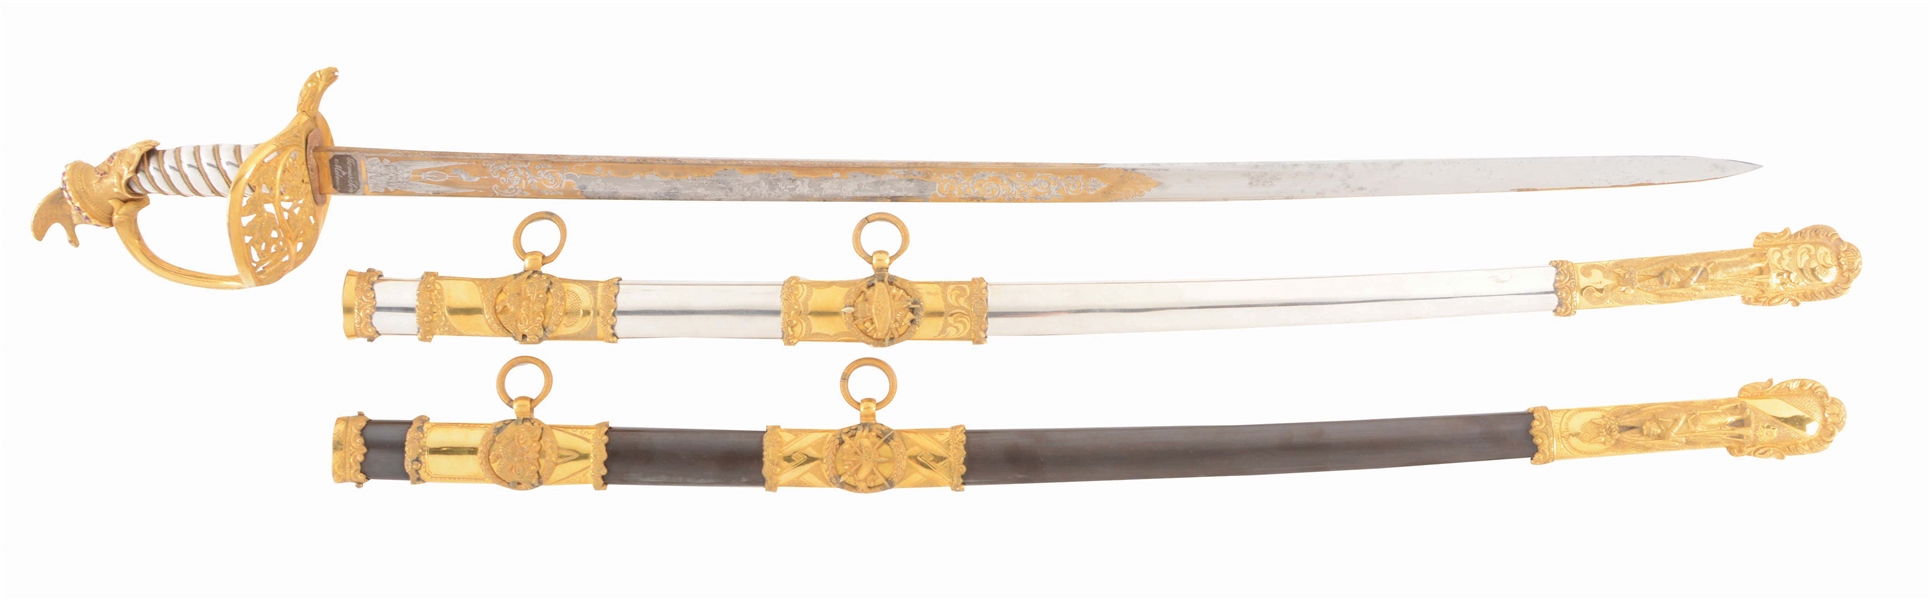 FANTASTIC CASED PRESENTATION GRADE U.S. MODEL 1850 STAFF AND FIELD OFFICERS SABER WITH TWO SCABBARDS.